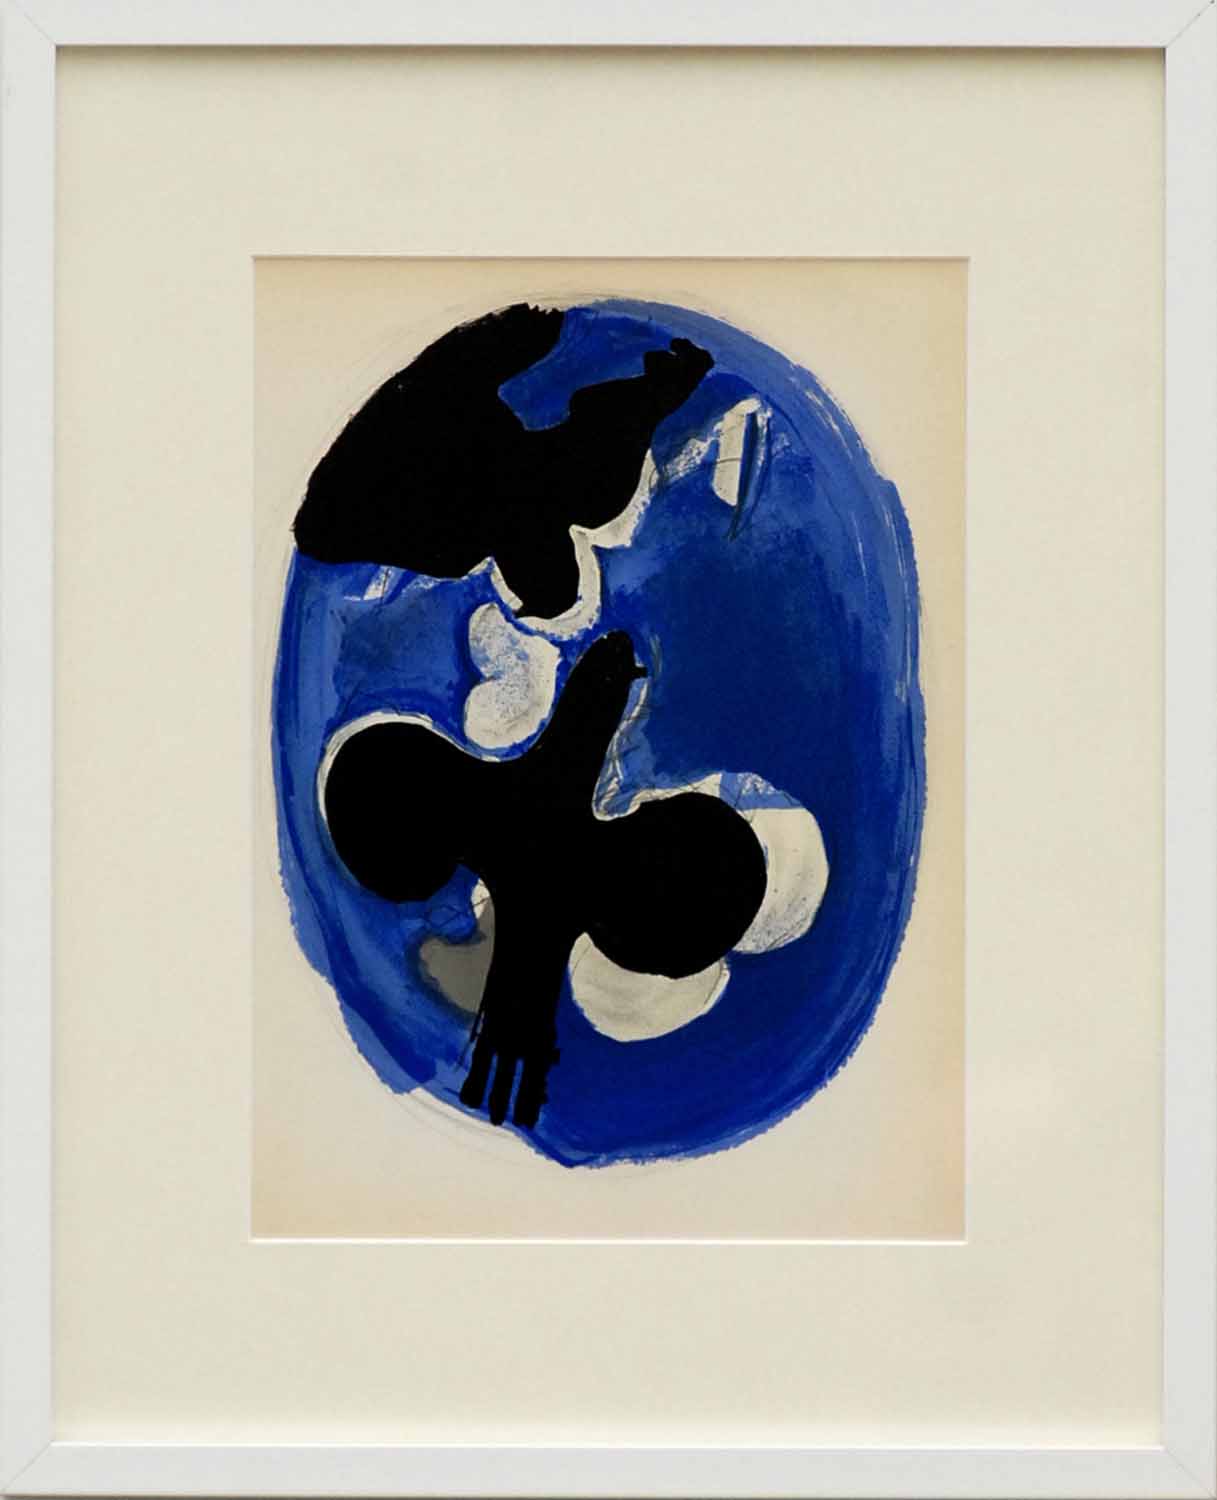 GEORGES BRAQUE 'Birds I & II', pair of lithographs, suite: 'Carnets Intimes', 1955, - Image 2 of 2